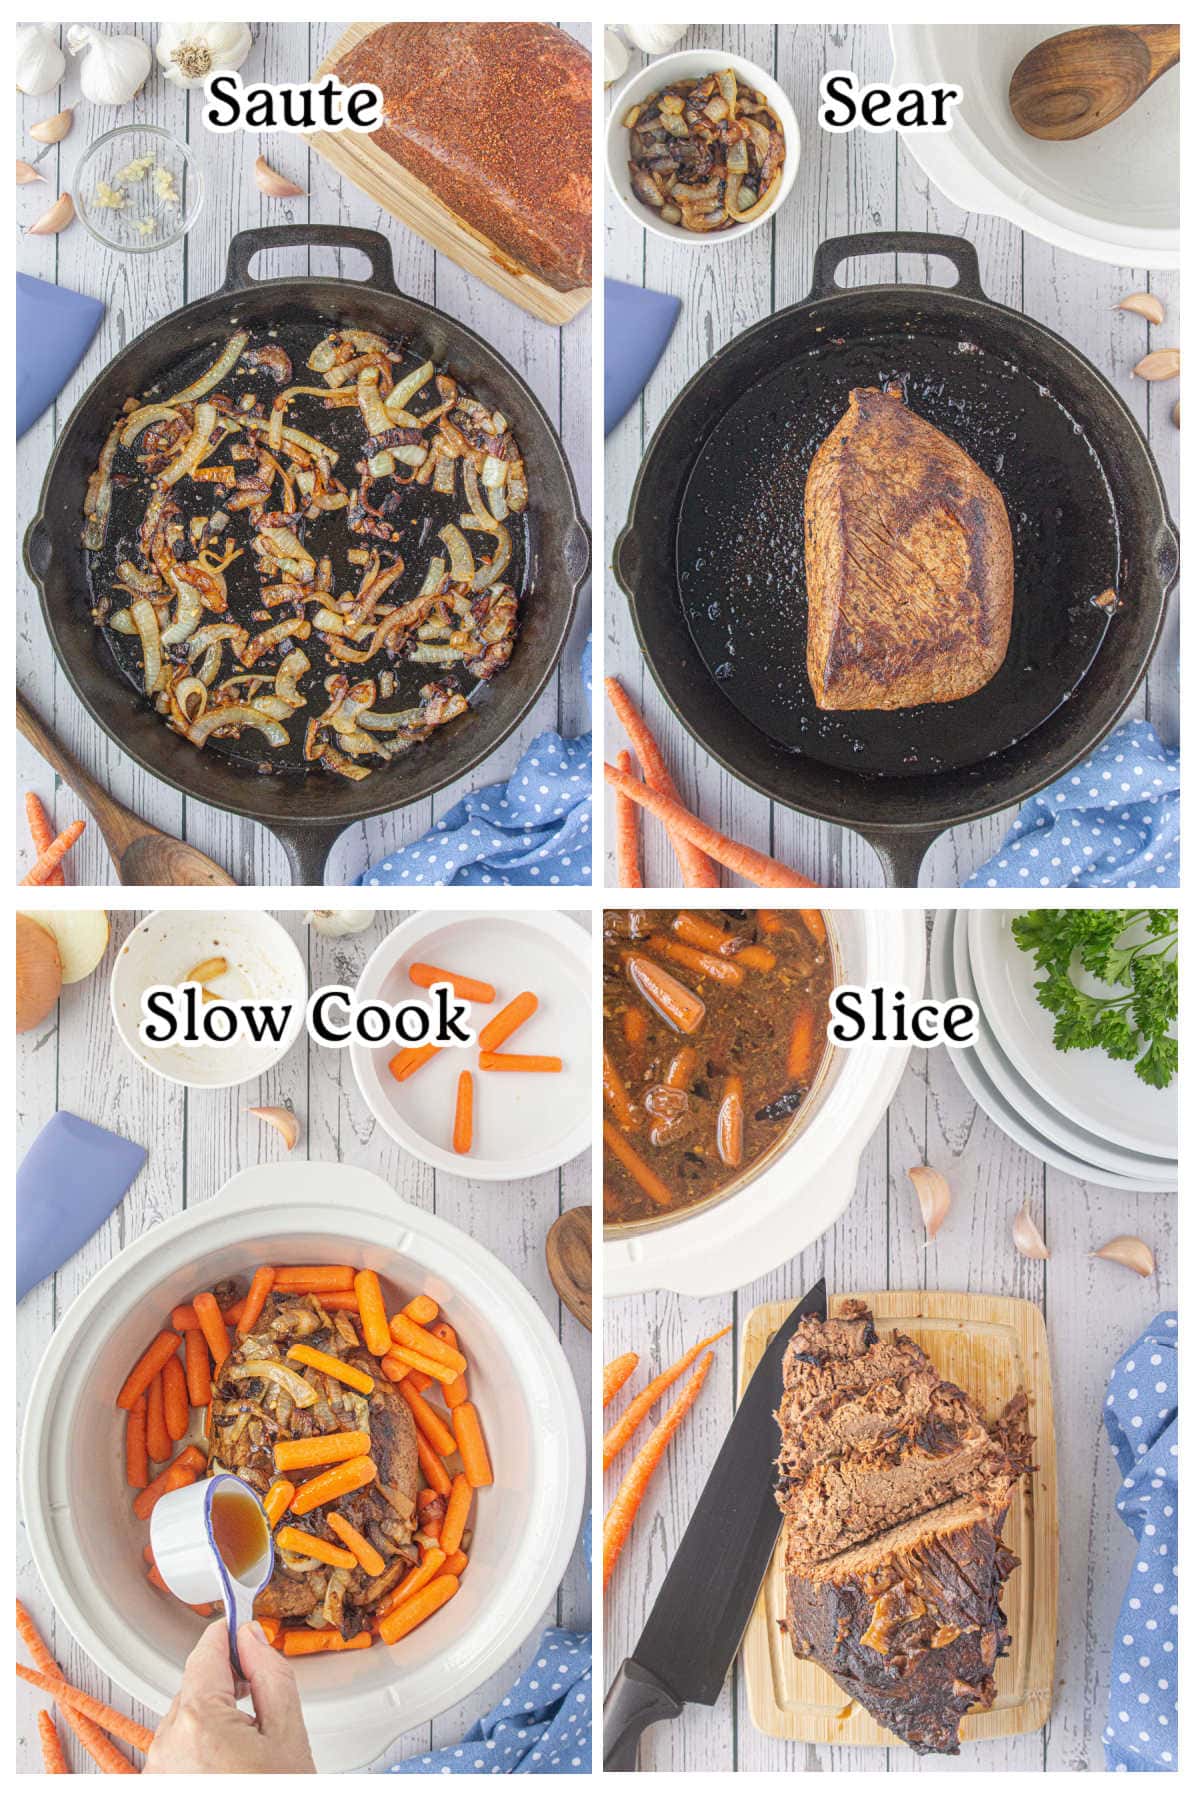 Four images with text overlay illustrating the main recipe steps.